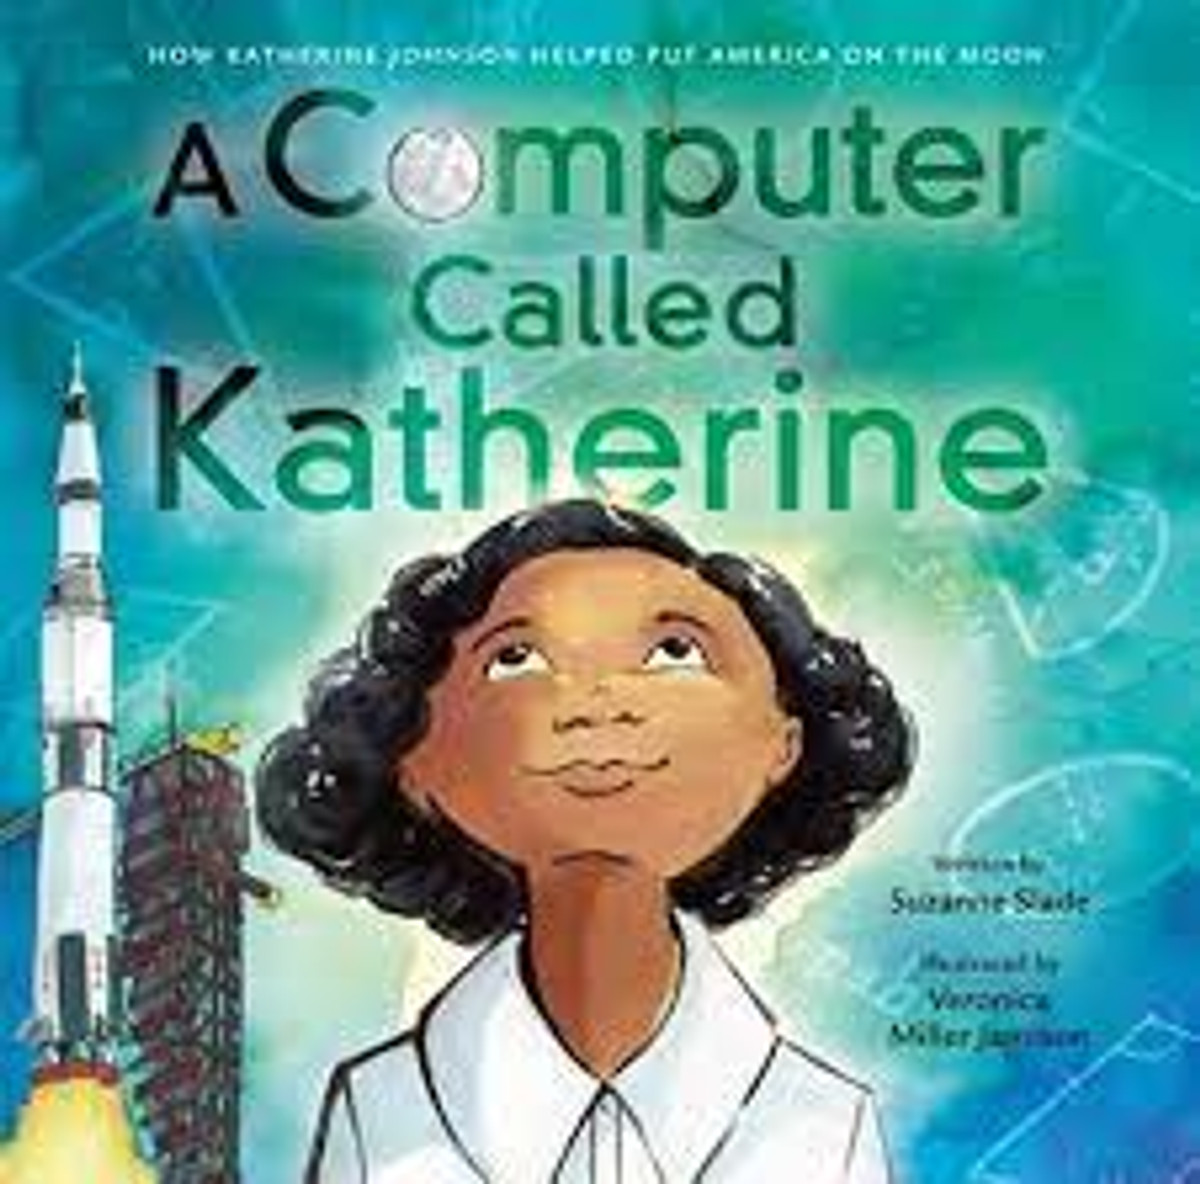 A Computer Called Katherine By Suzanne Slade